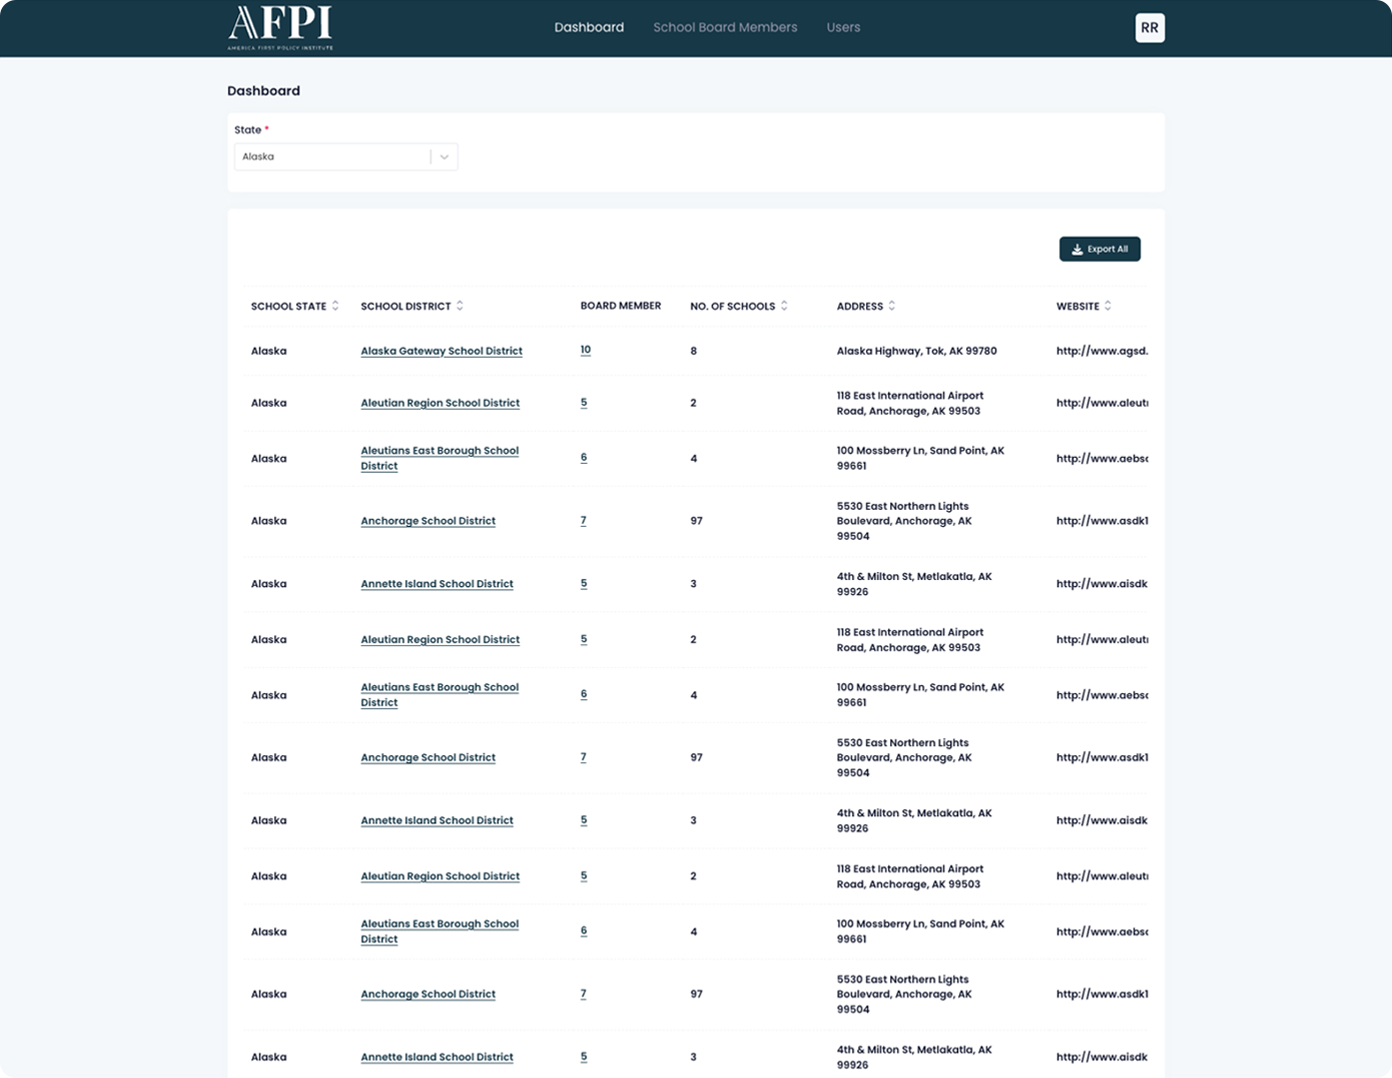 AFPI product page